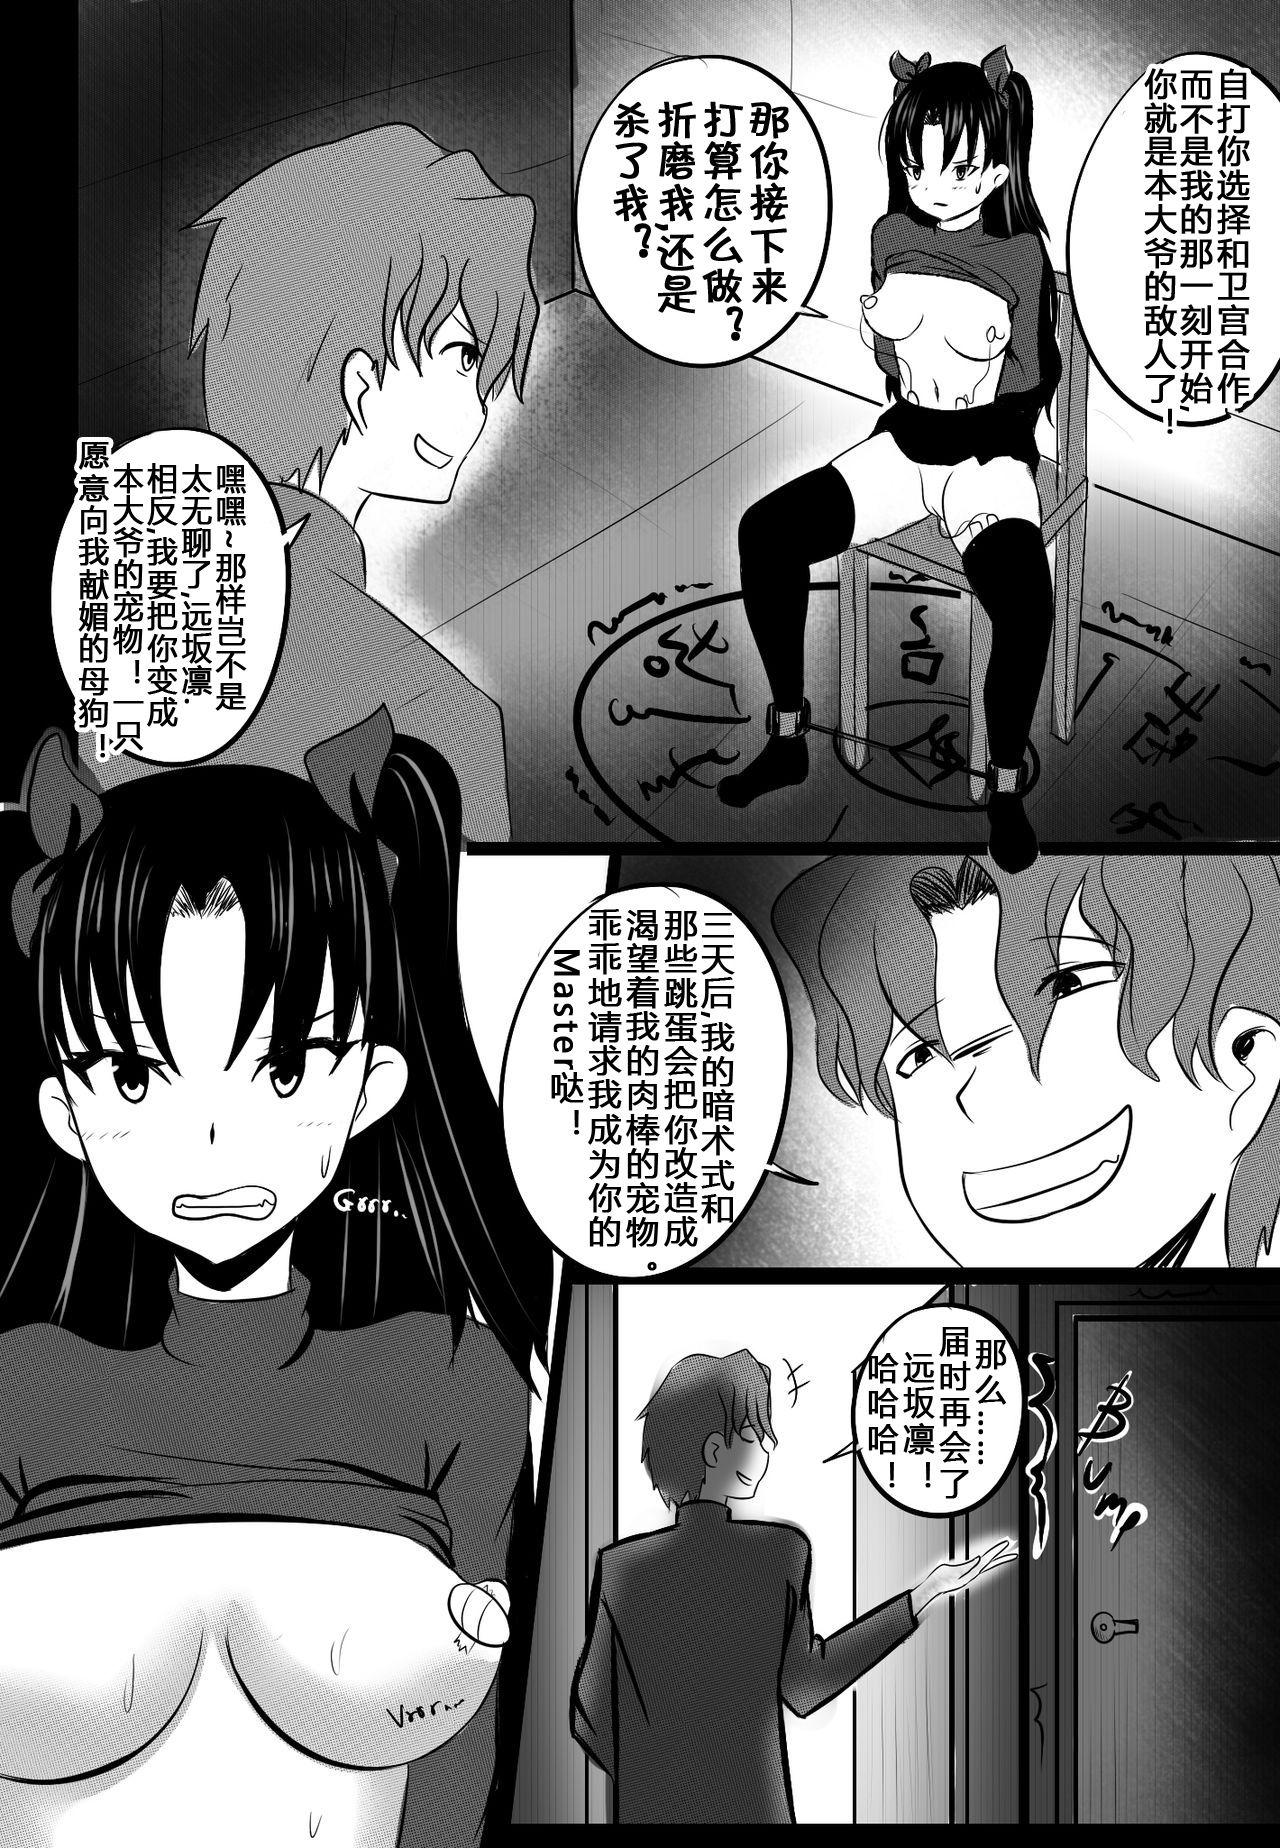 Furry B-Trayal 6 - Fate stay night Married - Page 5